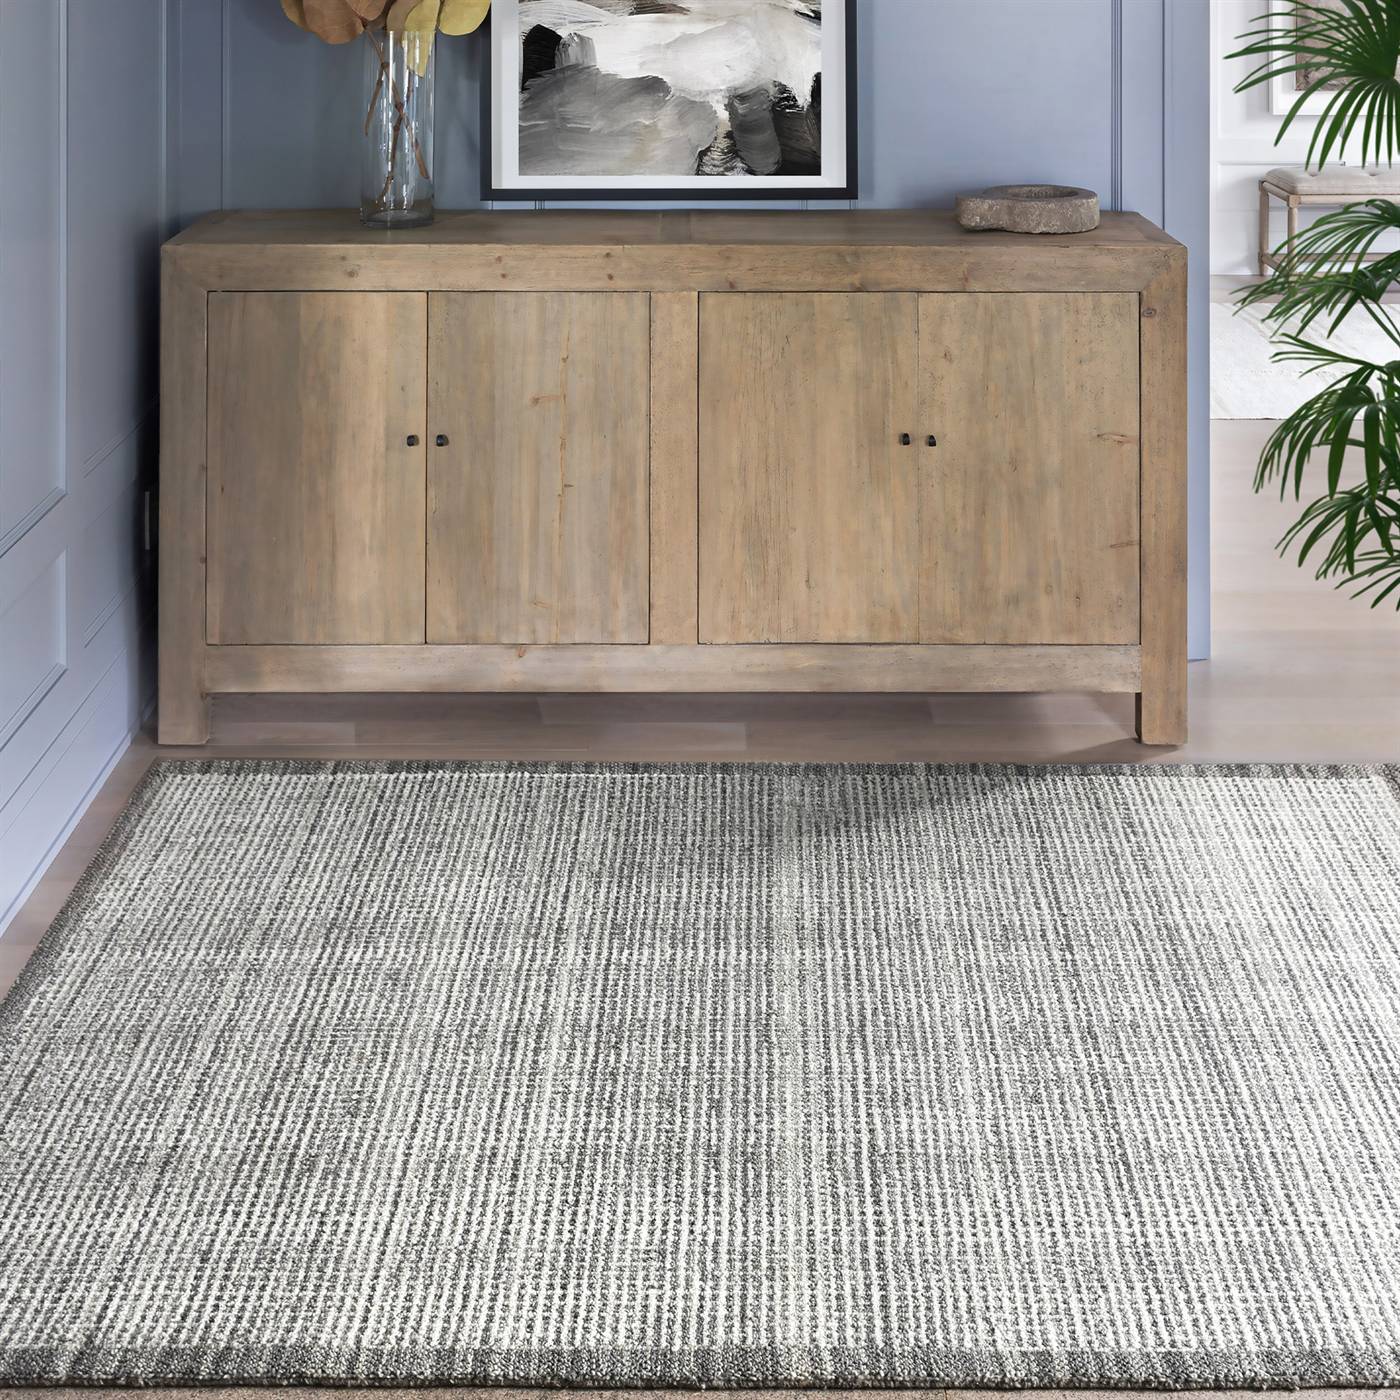 Area Rug, Bedroom Rug, Living Room Rug, Living Area Rug, Indian Rug, Office Carpet, Office Rug, Shop Rug Online, Natural White, Grey, Wool, Hand Woven, Over Tufted, Handwoven, All Loop, Contemporary 